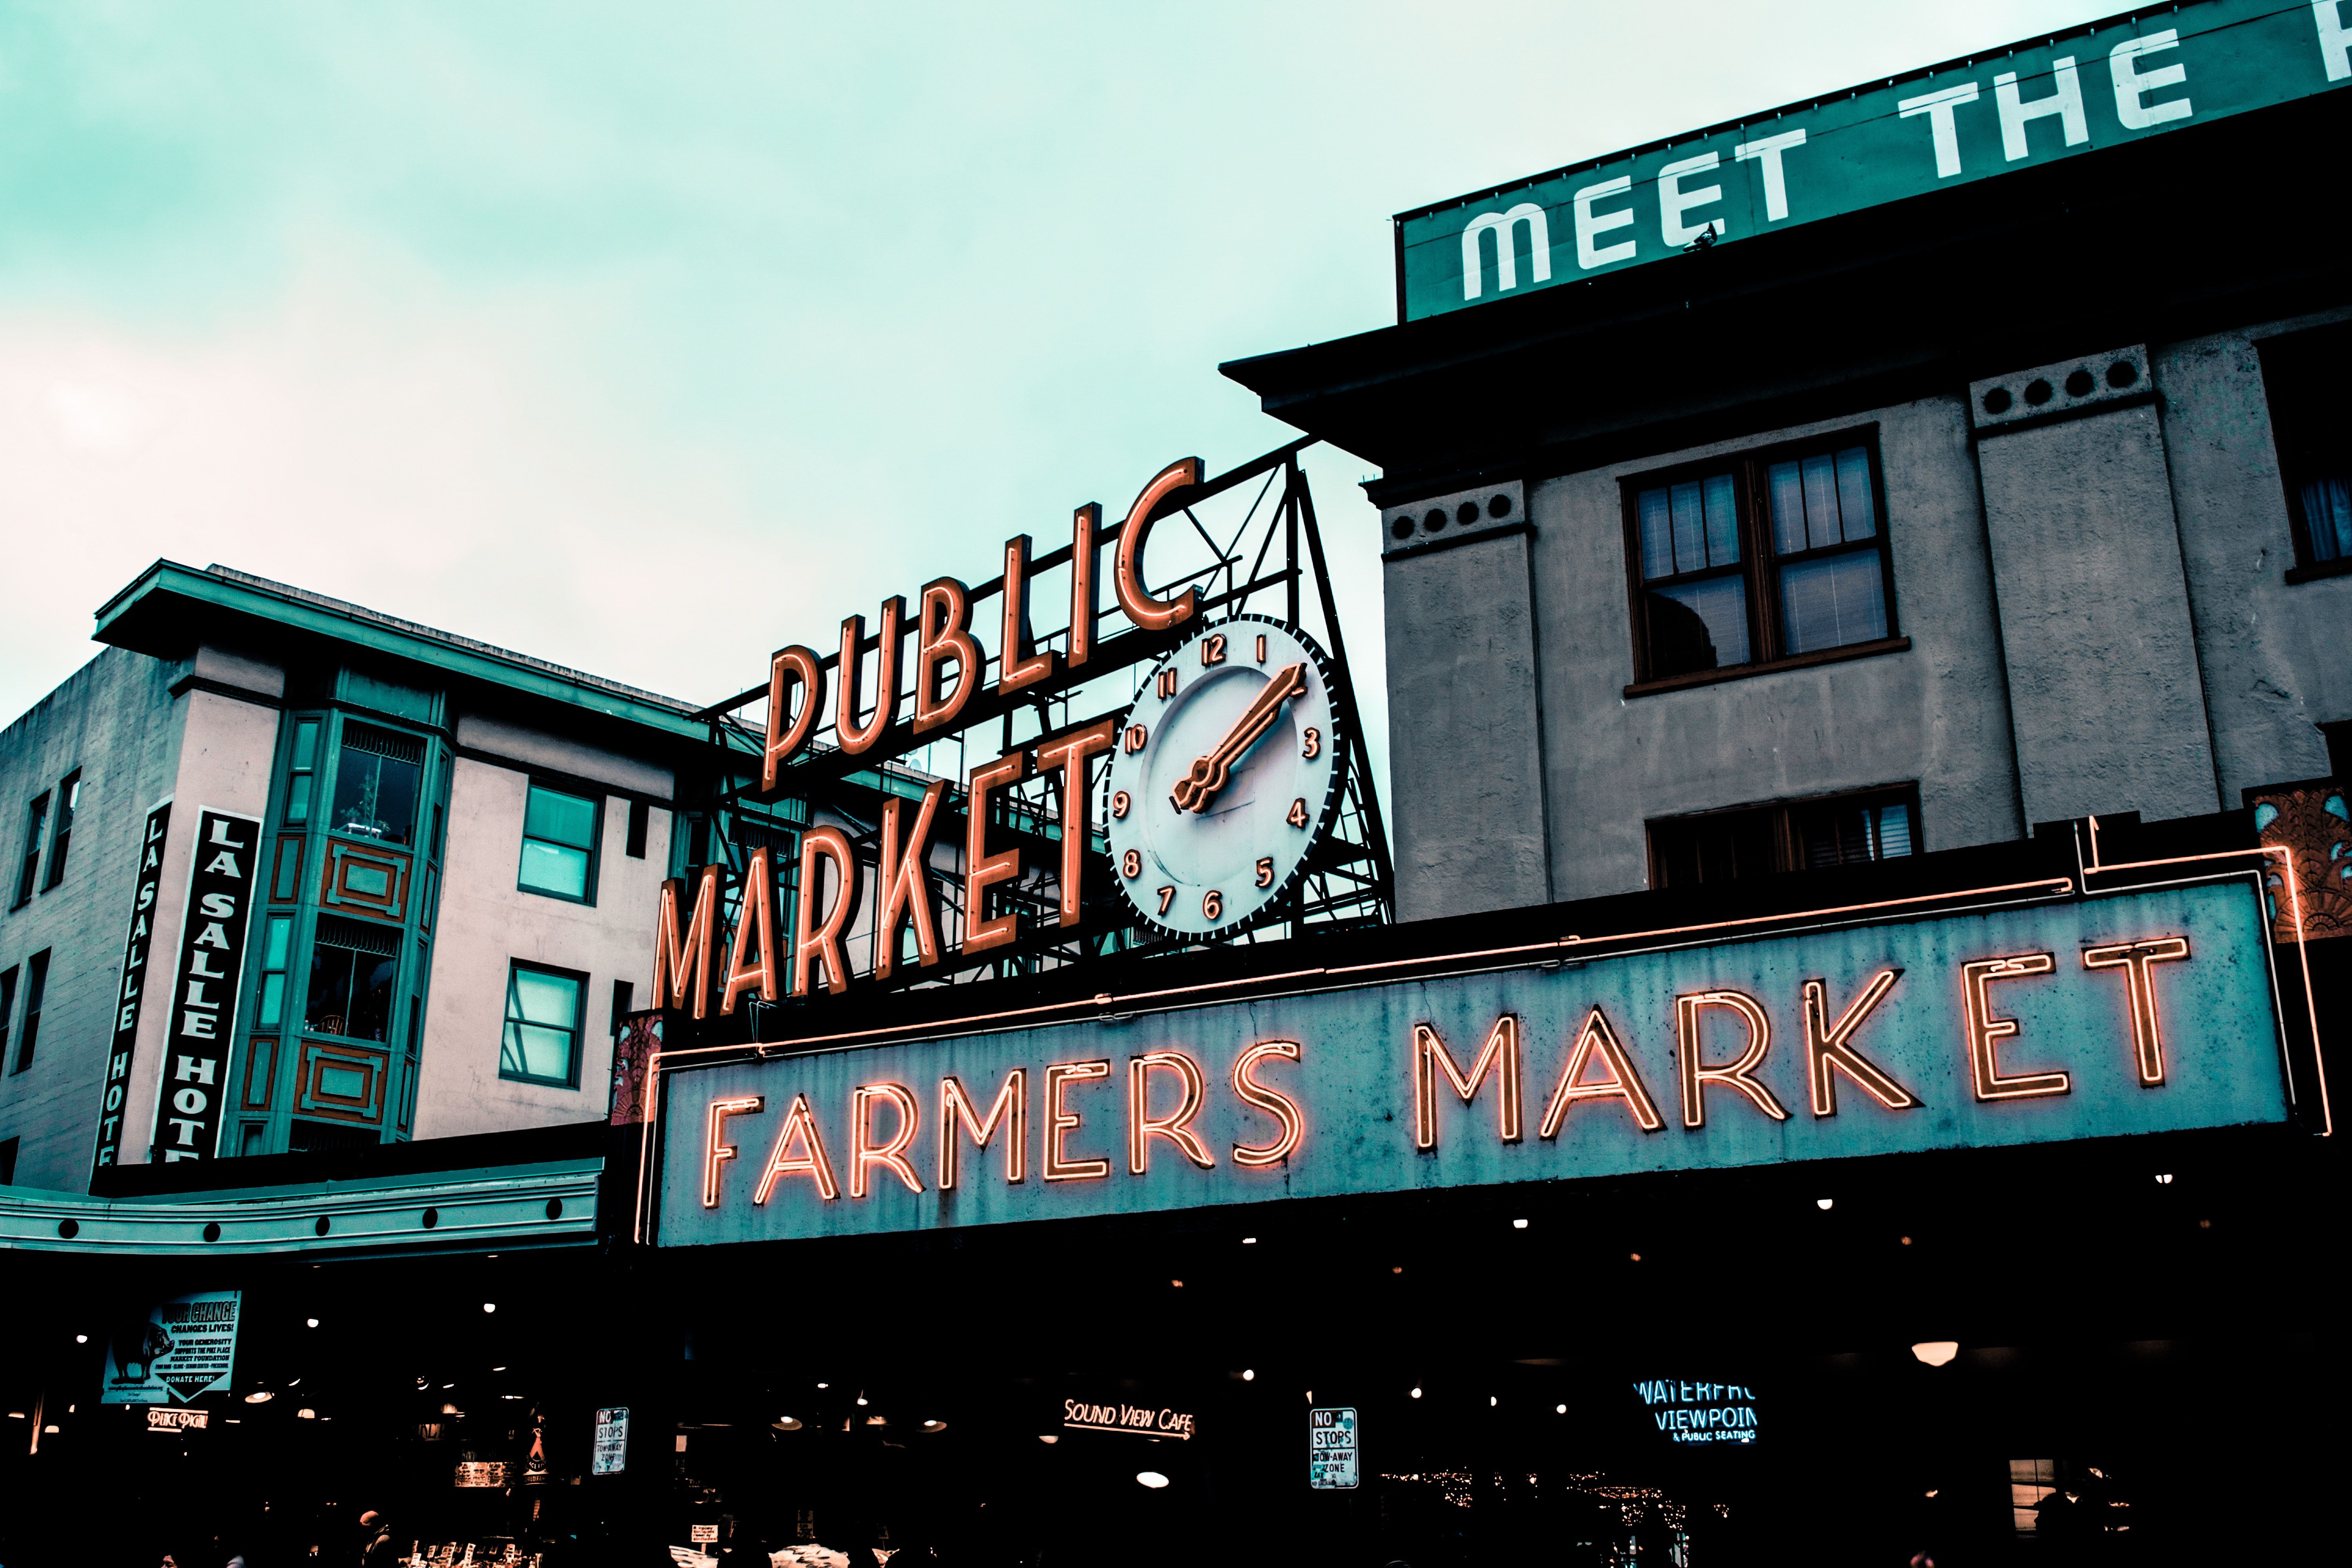 Pike Place Market sign against the sky in Seattle